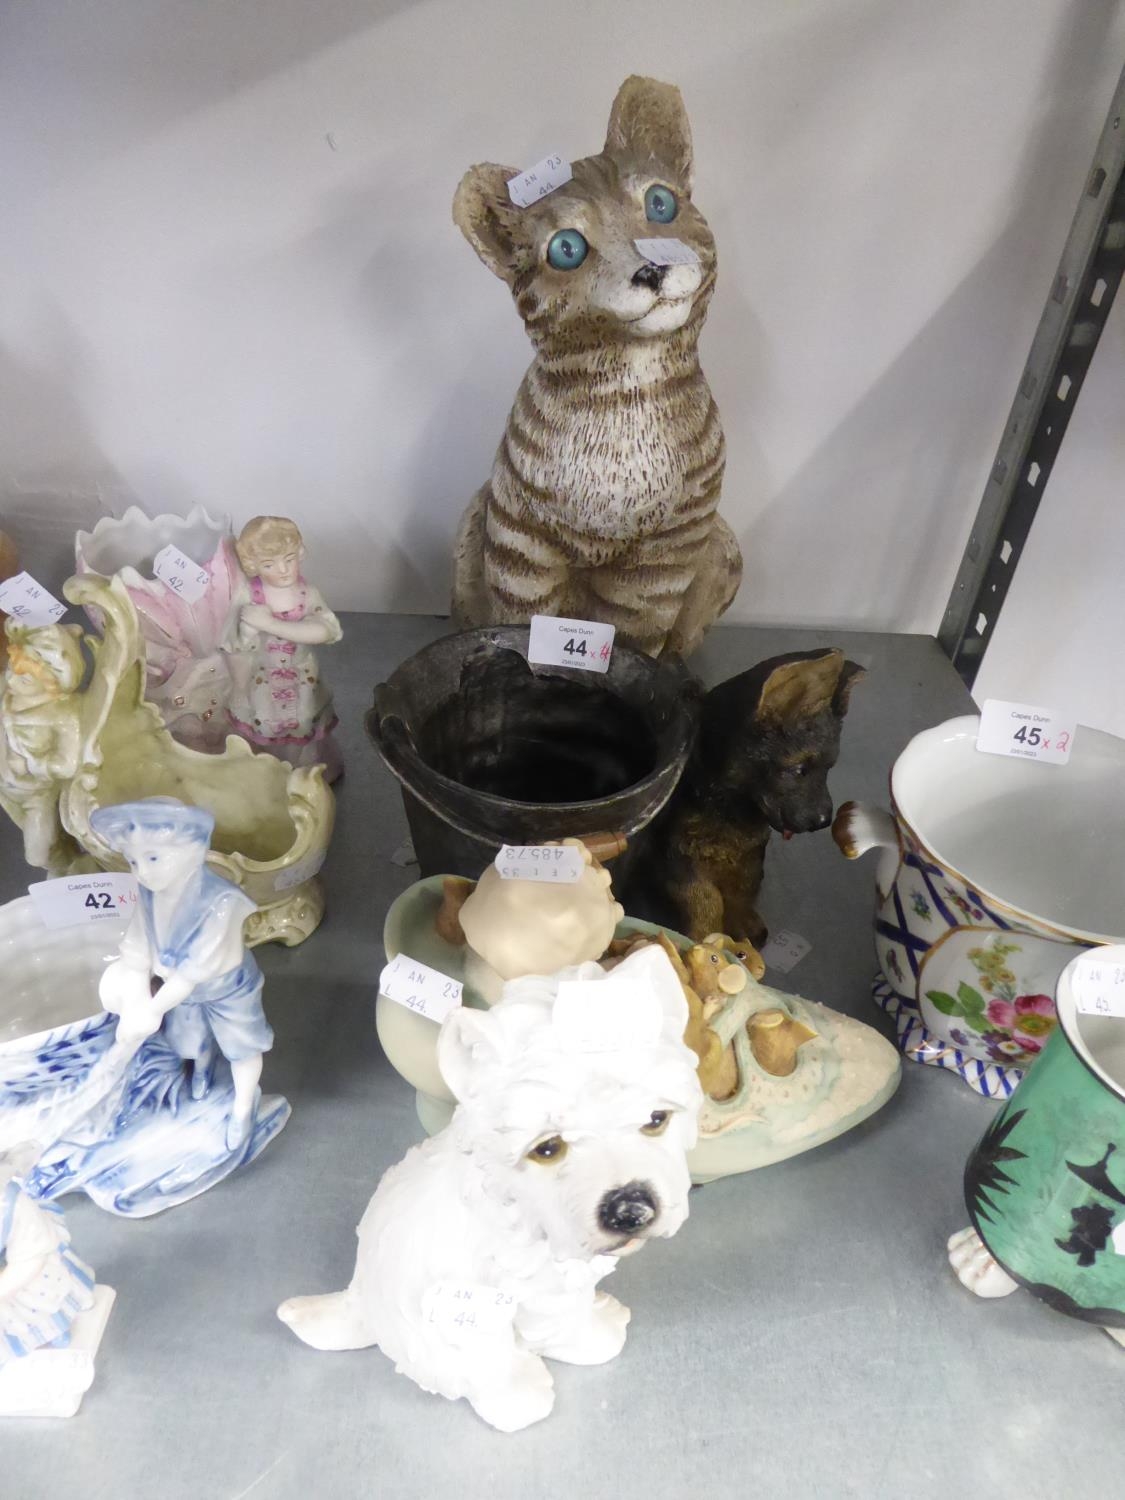 A LARGE RESIN MODEL OF A CAT; A RESIN MODEL OF A SCOTS TERRIER; A RESIN GROUP OF MICE IN A SHOE